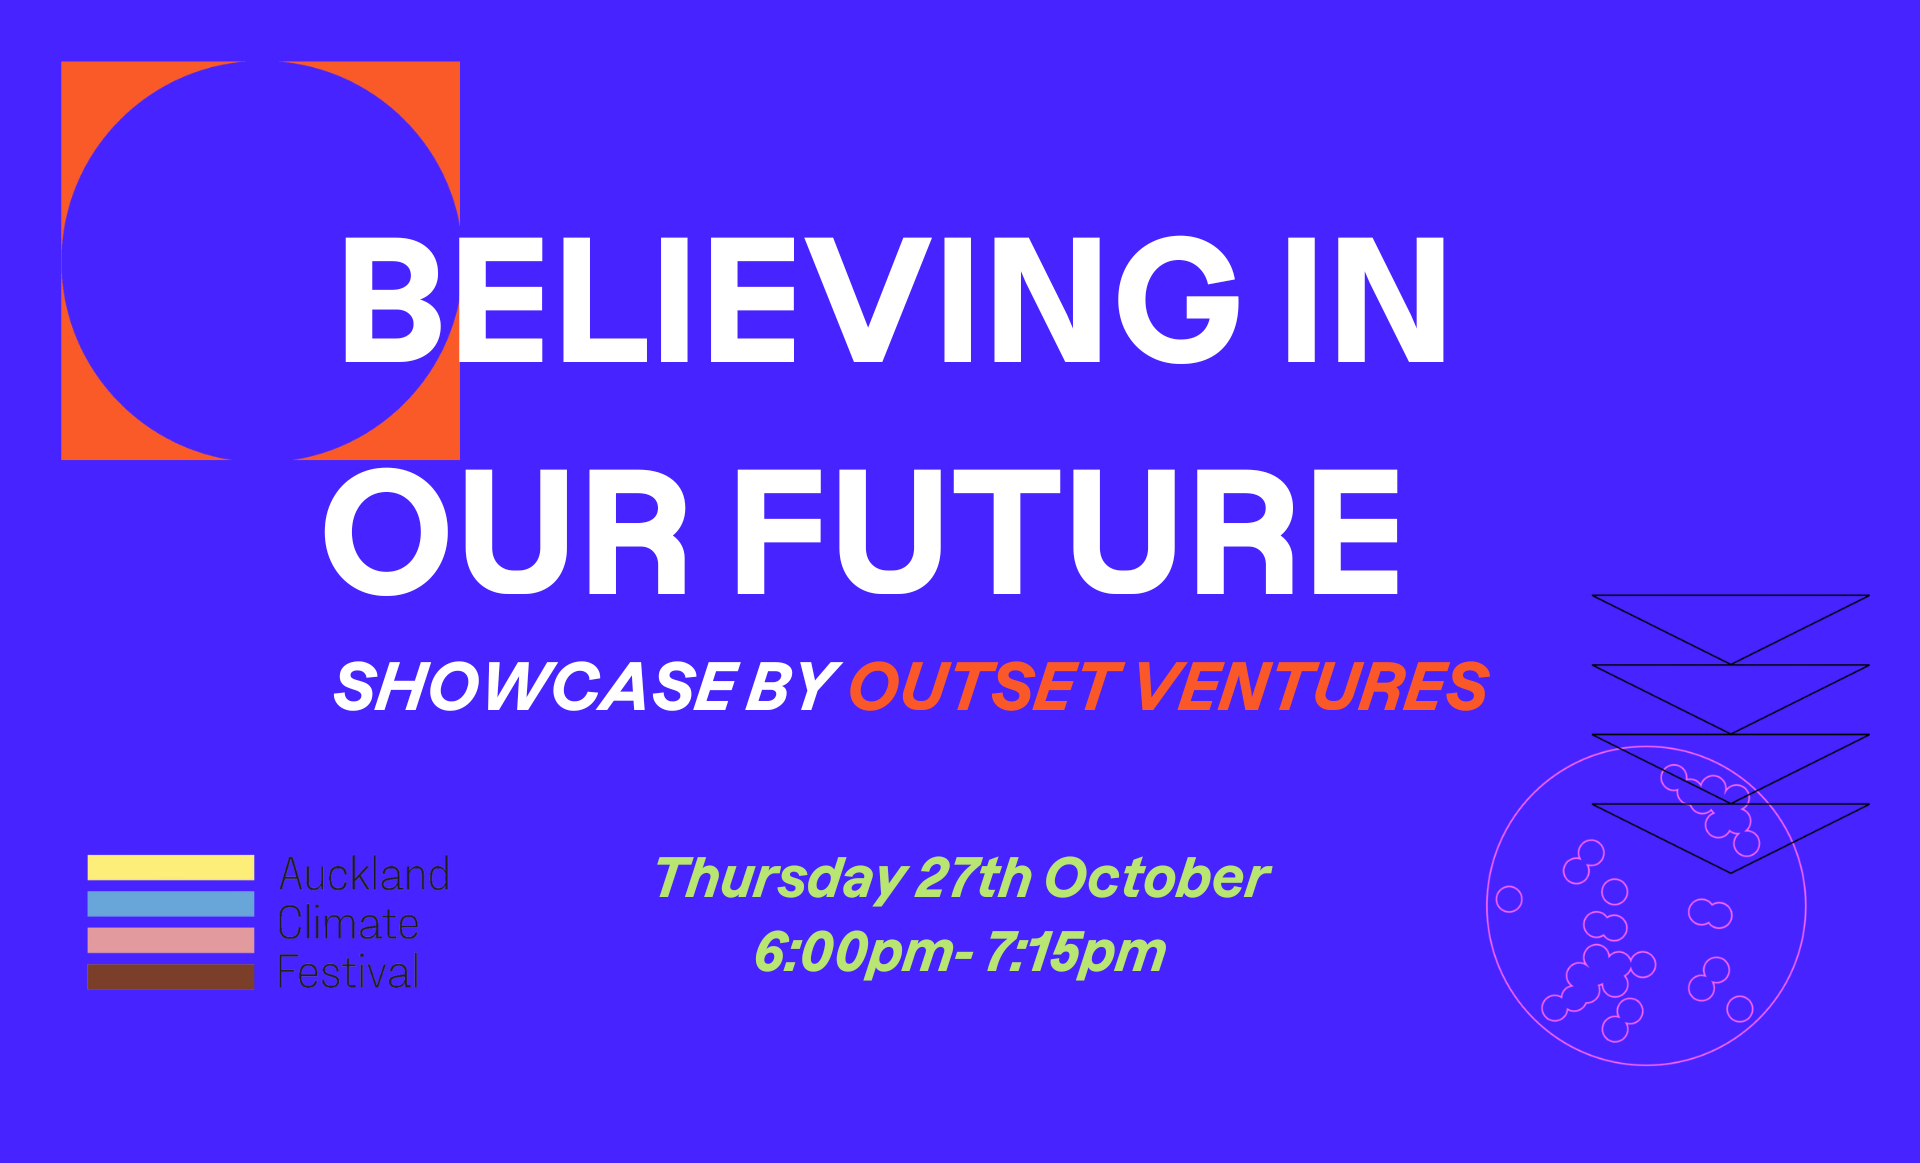 Showcase by Outset Ventures